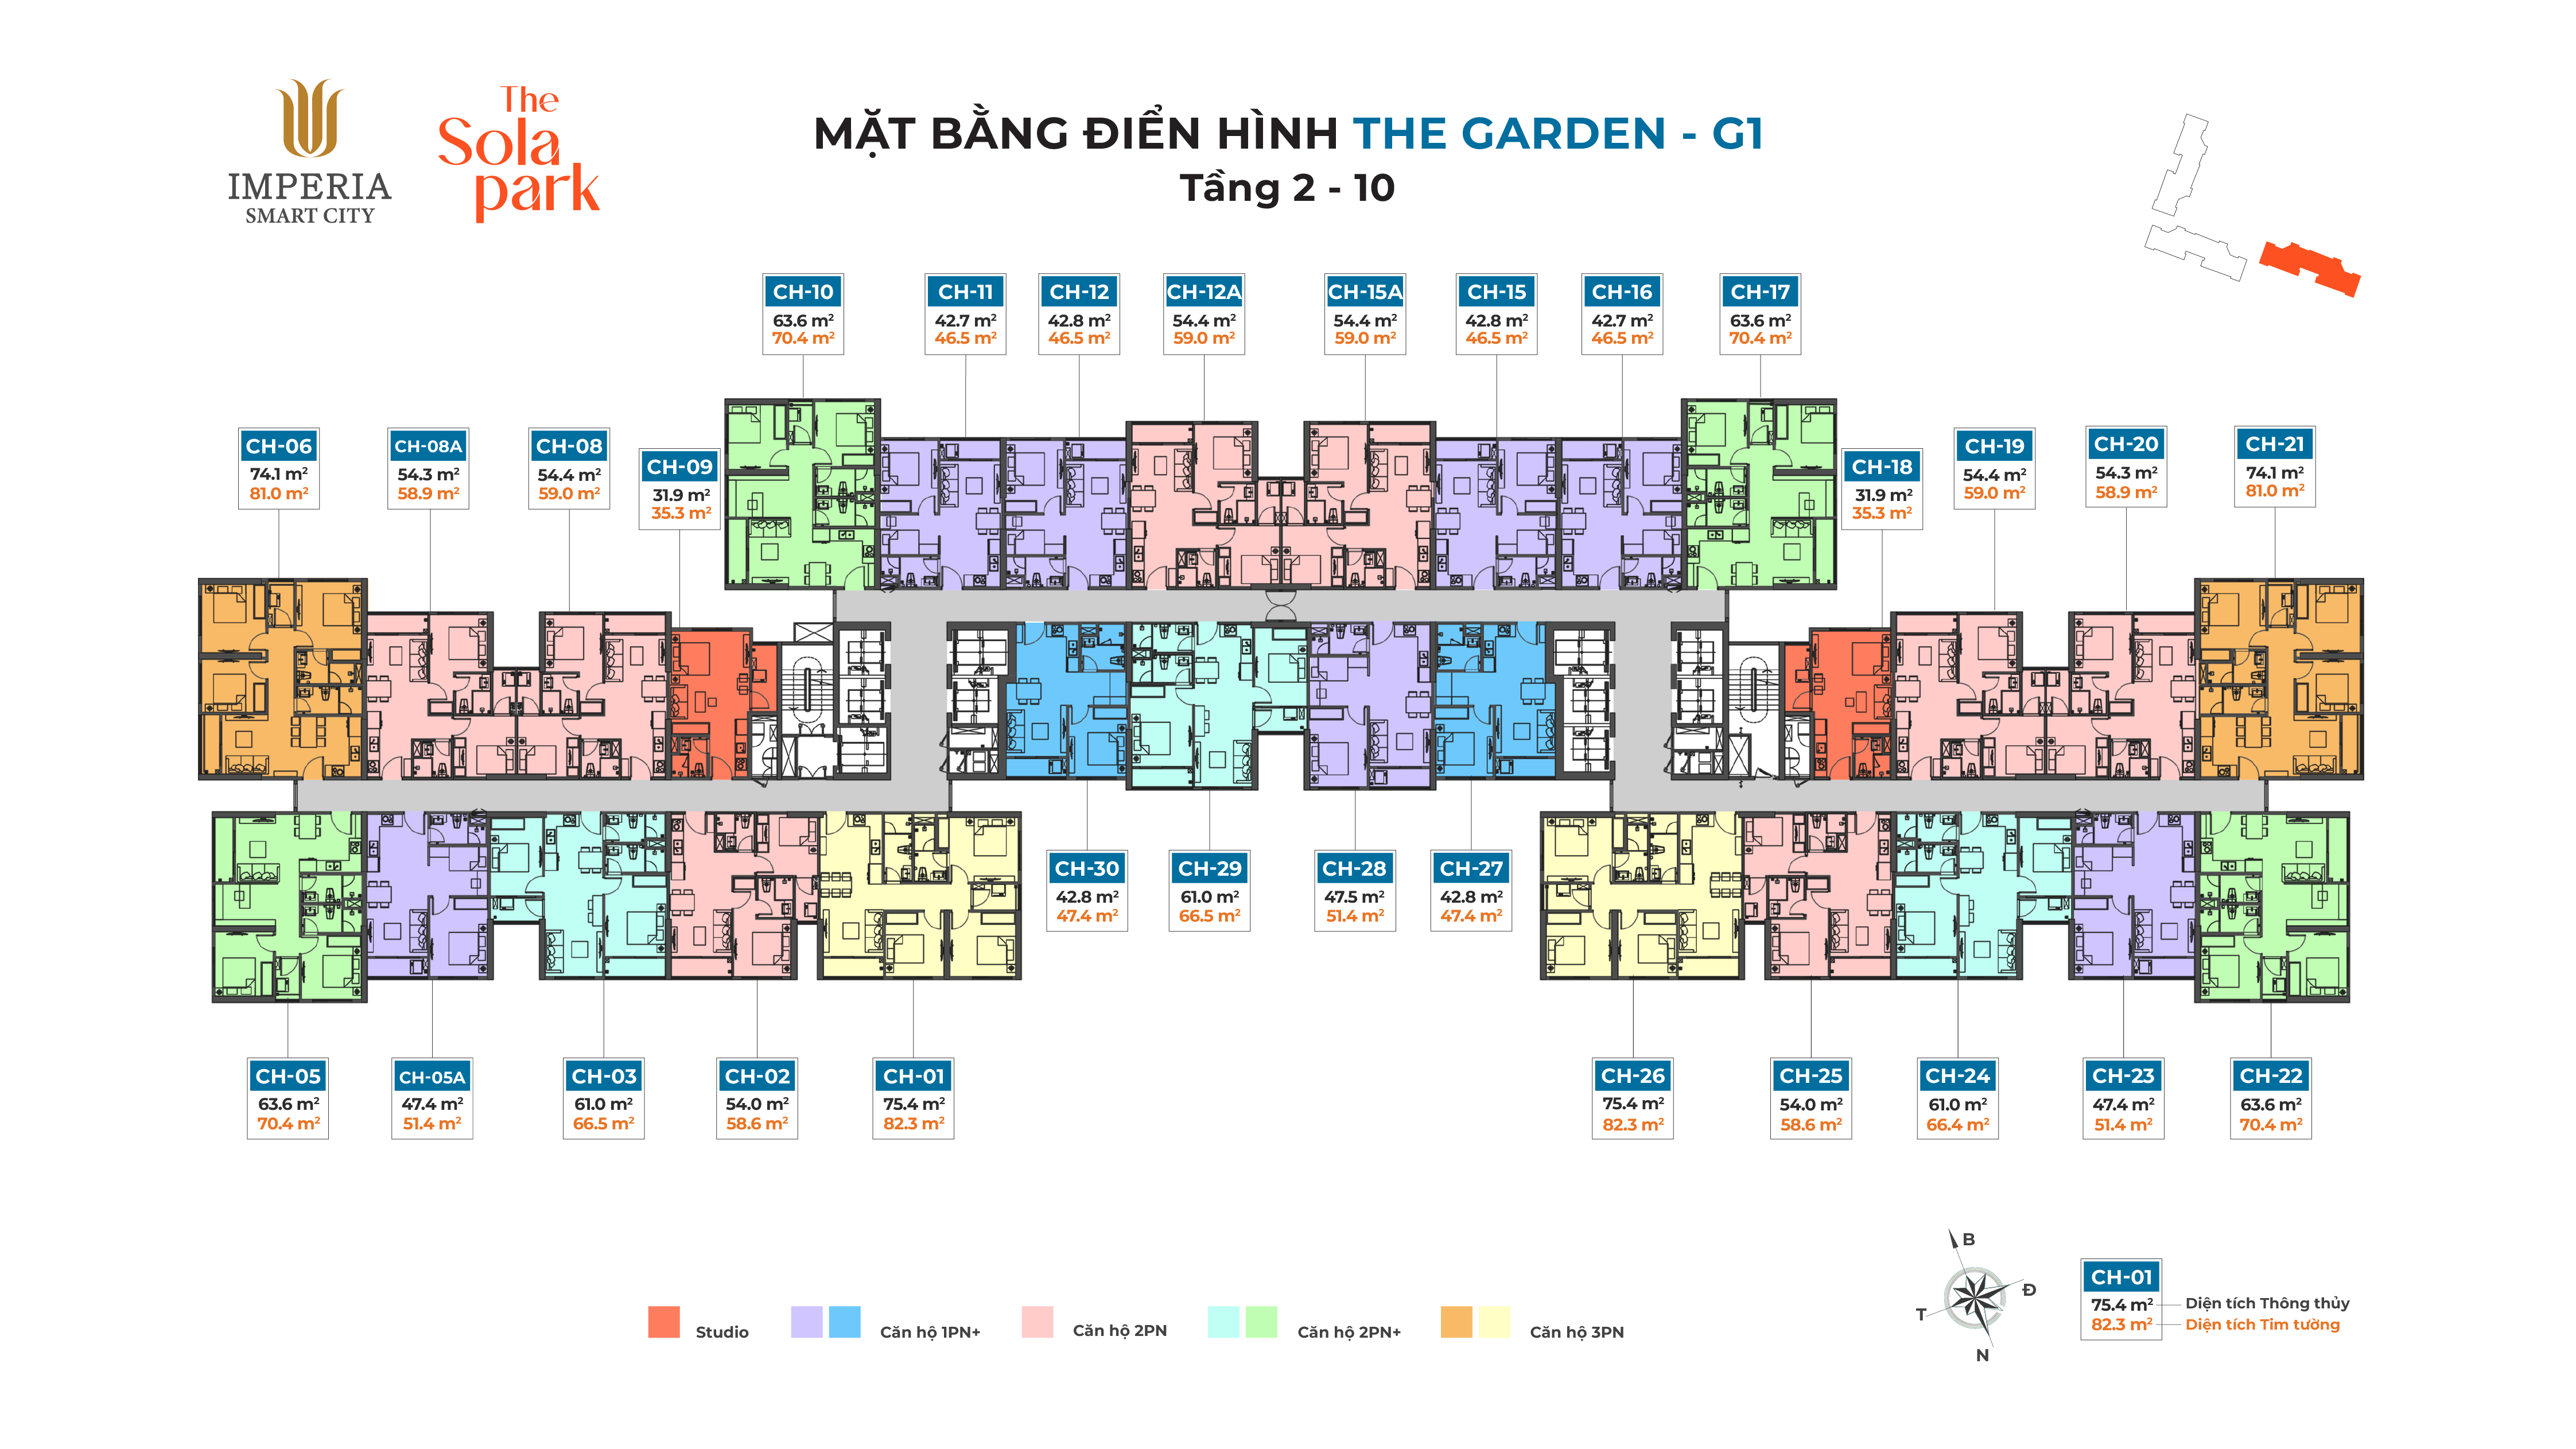 Mặt bằng tầng G1 The Garden Imperia Sola Park